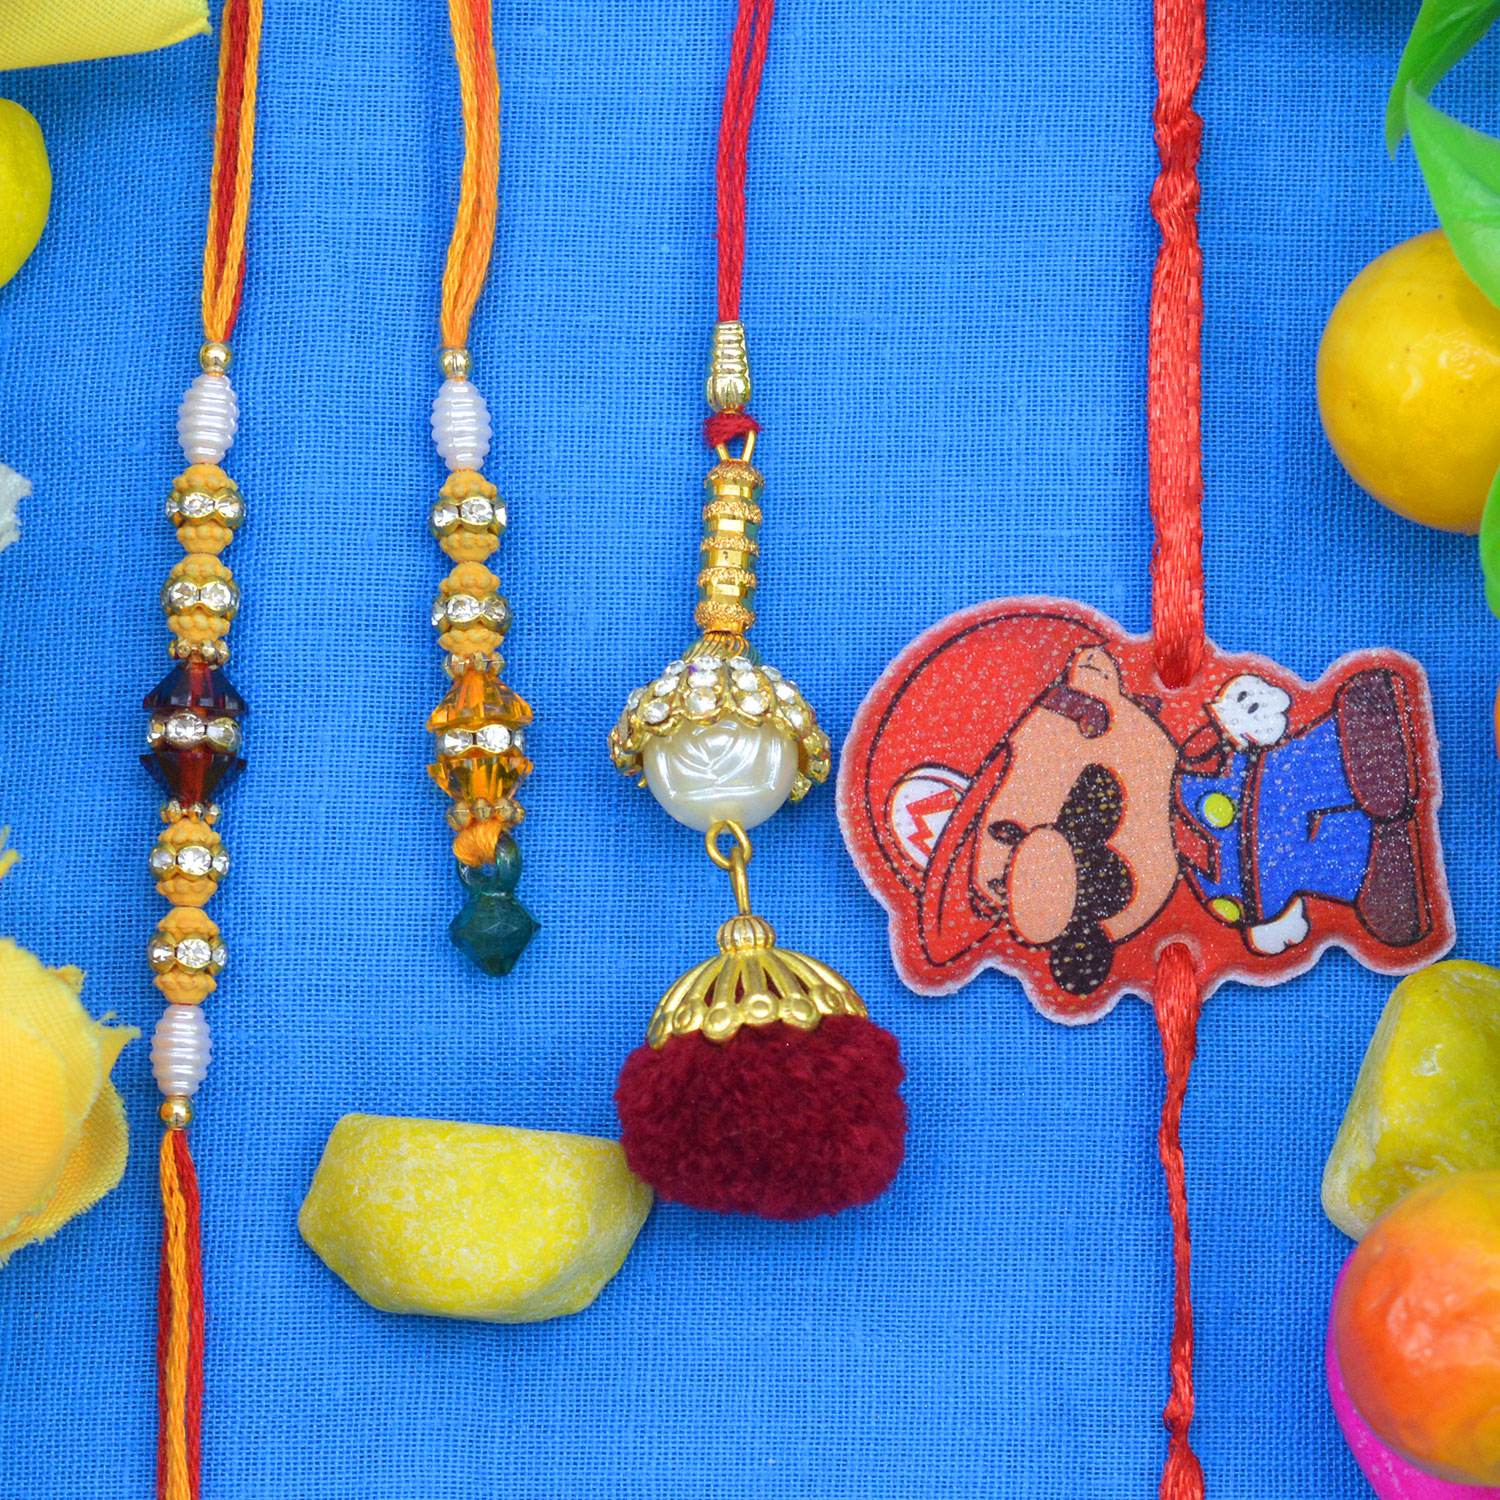 Two Different Designed Lumba Rakhis with One Khaki Color Brother Rakhi and One Mickey Mouse Kid Rakhis